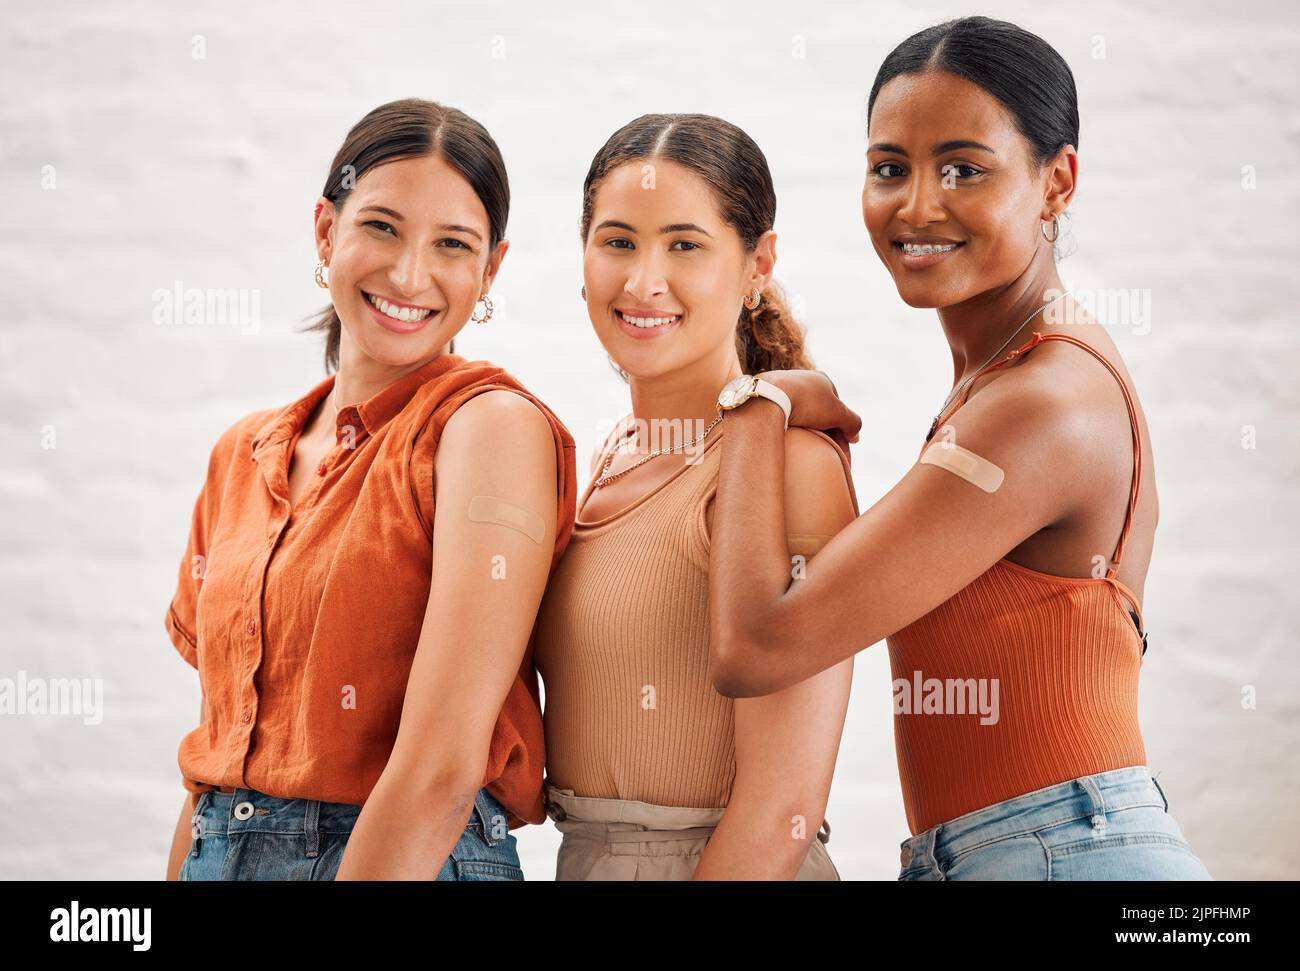 Covid vaccination or flu shot inside of girl friends, female friendship and teenagers smiling. Portrait of a happy and diverse friend group standing Stock Photo